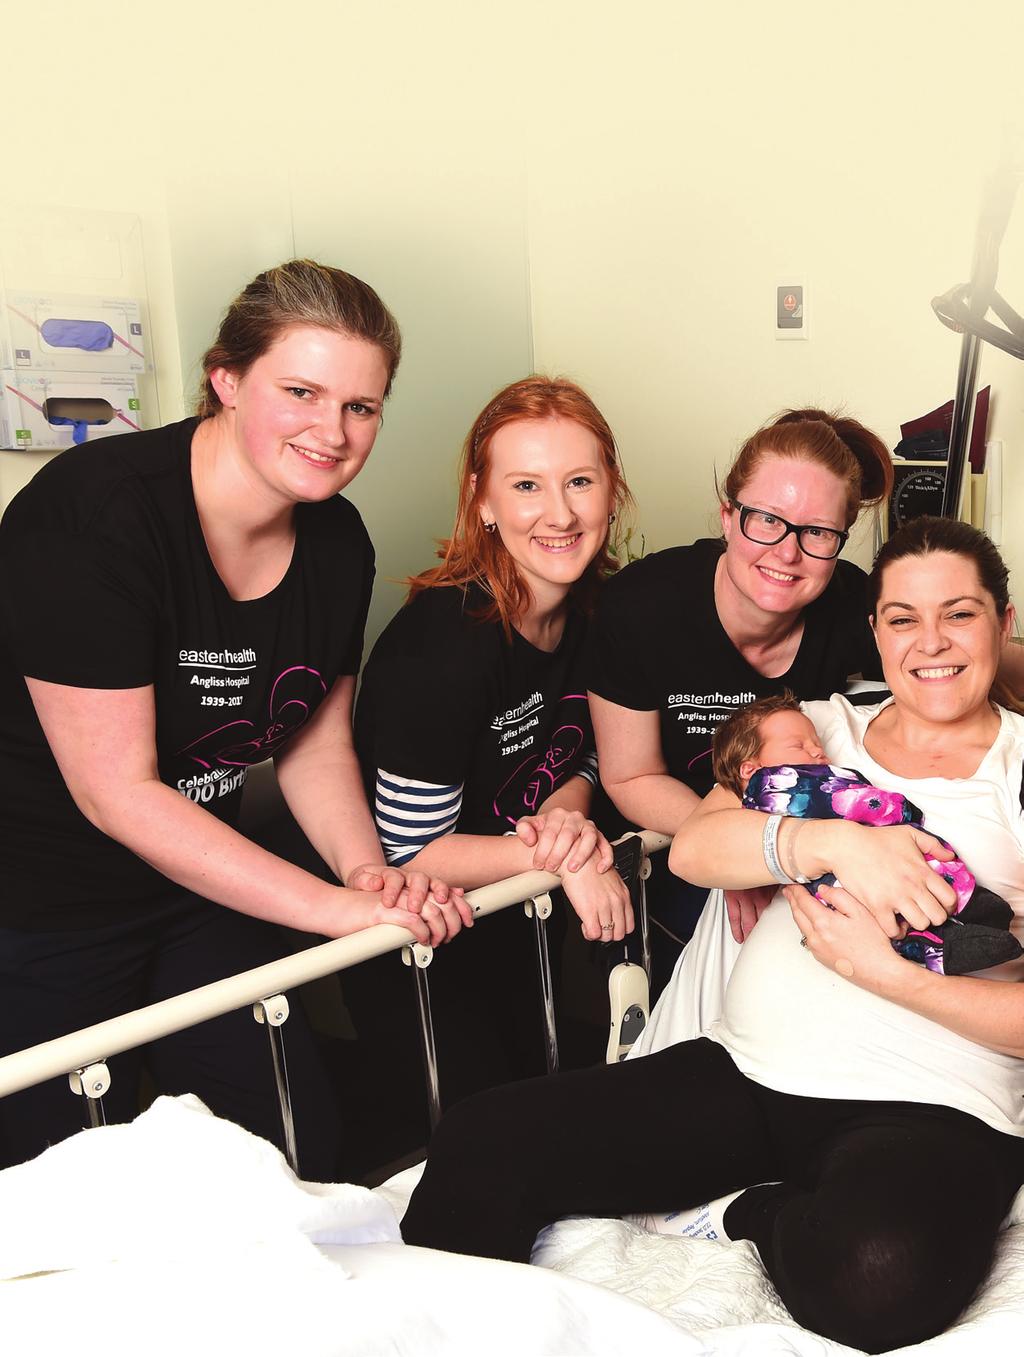 BRILLIANT BABY MILESTONE Angliss Hospital in Upper Ferntree Gully has welcomed its 100,000th baby, with Taylor Cox from Chirnside Park born at 10.25am on July 31, 2017.